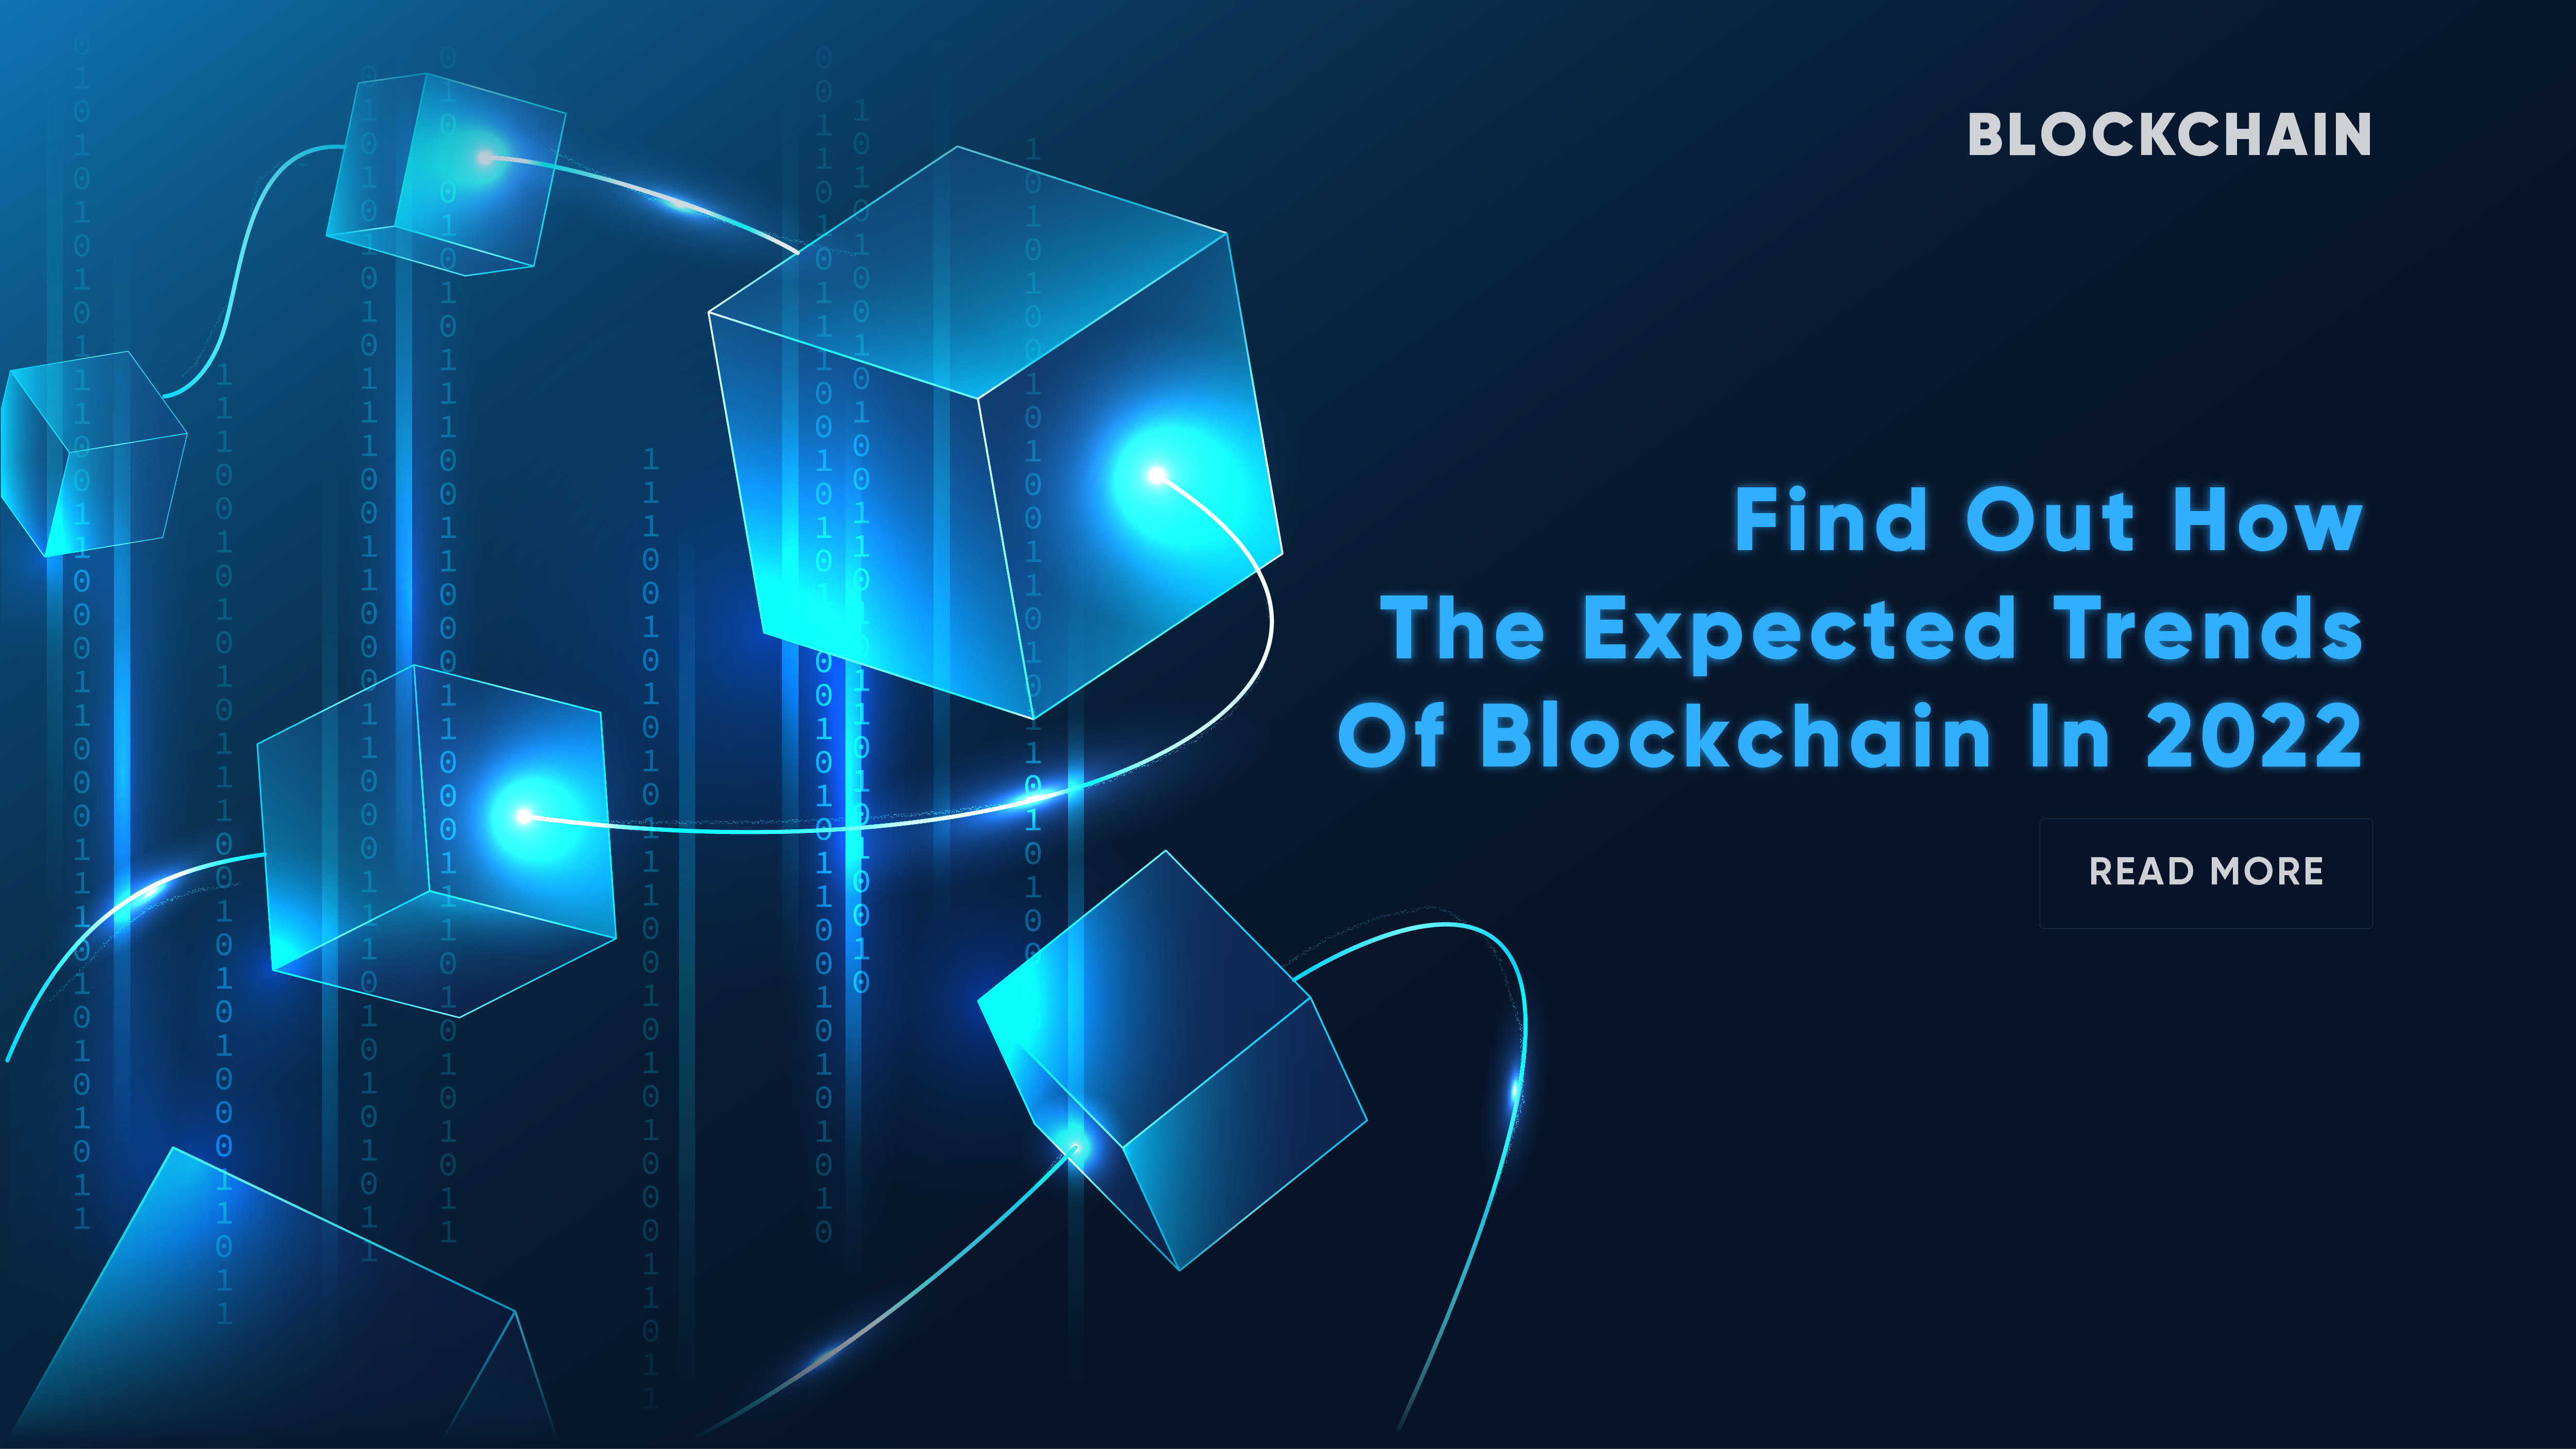 Find-Out-How-The-Expected-Trends-Of-Blockchain-In-2022-01